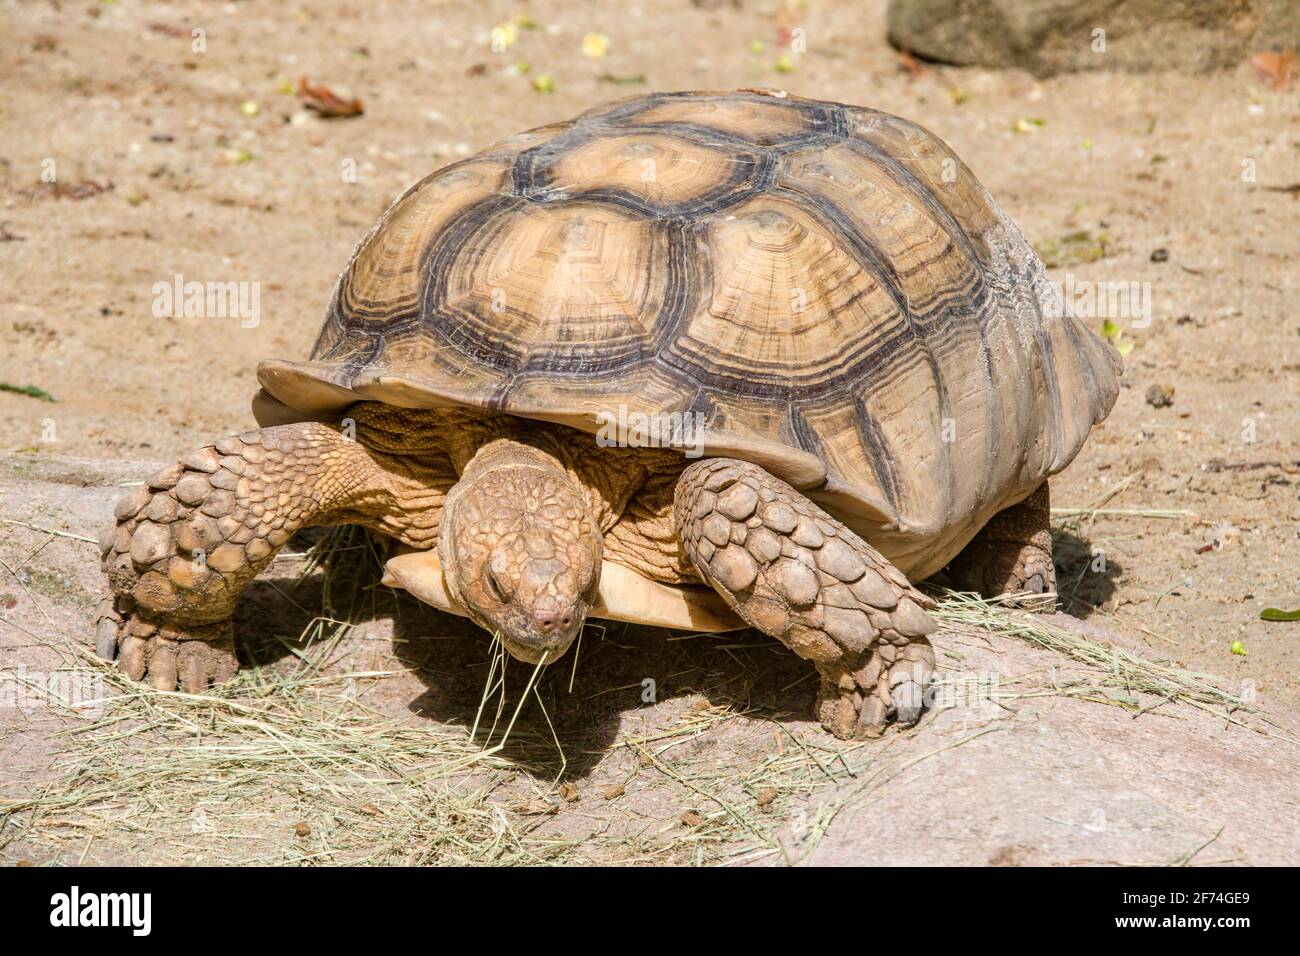 The African spurred tortoise eats grass. It is a species of tortoise, which inhabits the southern edge of the Sahara desert in Africa. Stock Photo